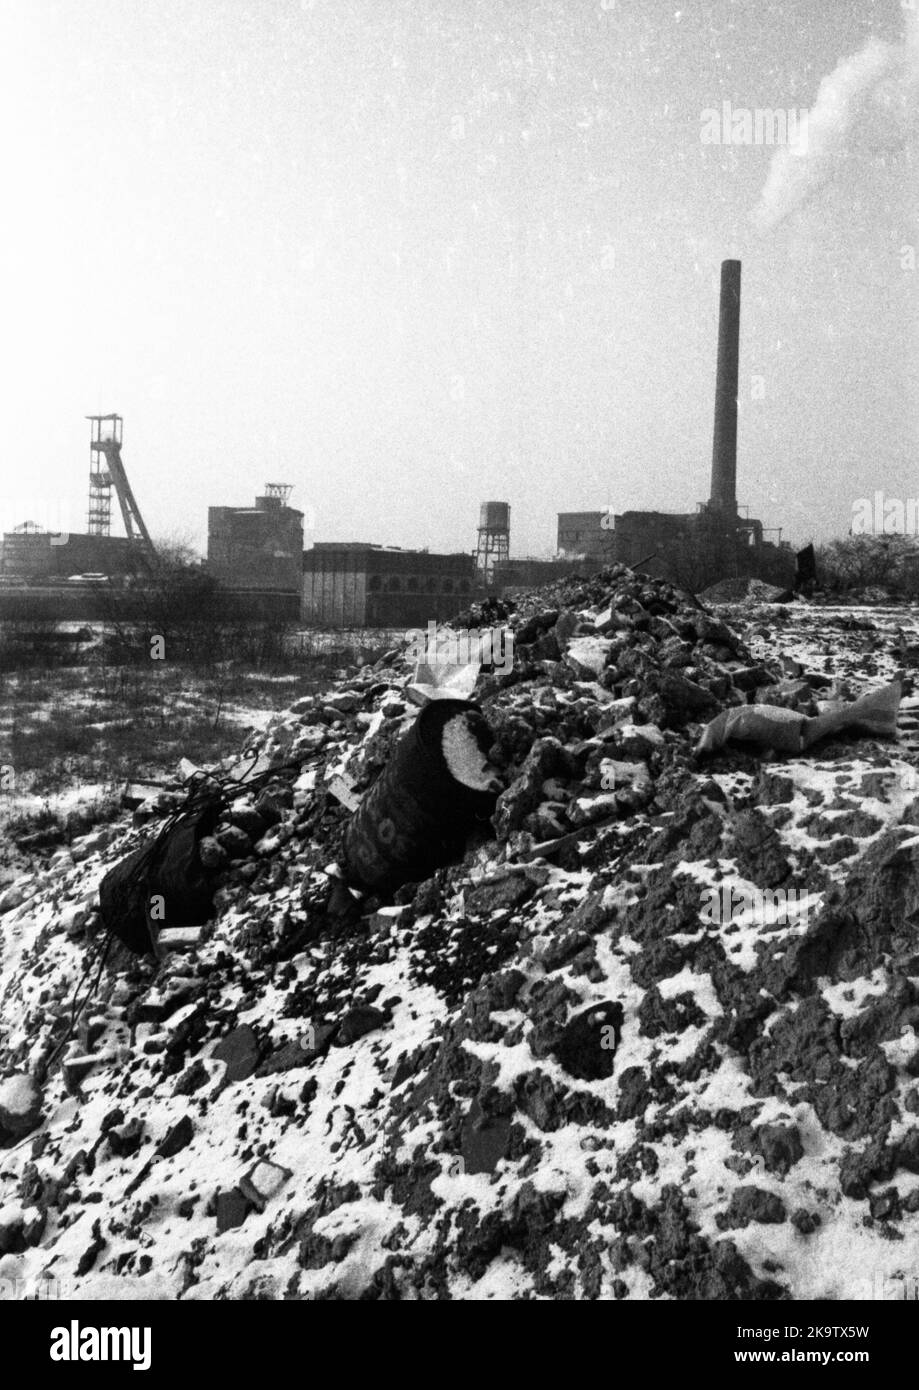 Not only rubble but also poisons were dumped at this Essen landfill site, here on 31. 1. 1972, Germany Stock Photo